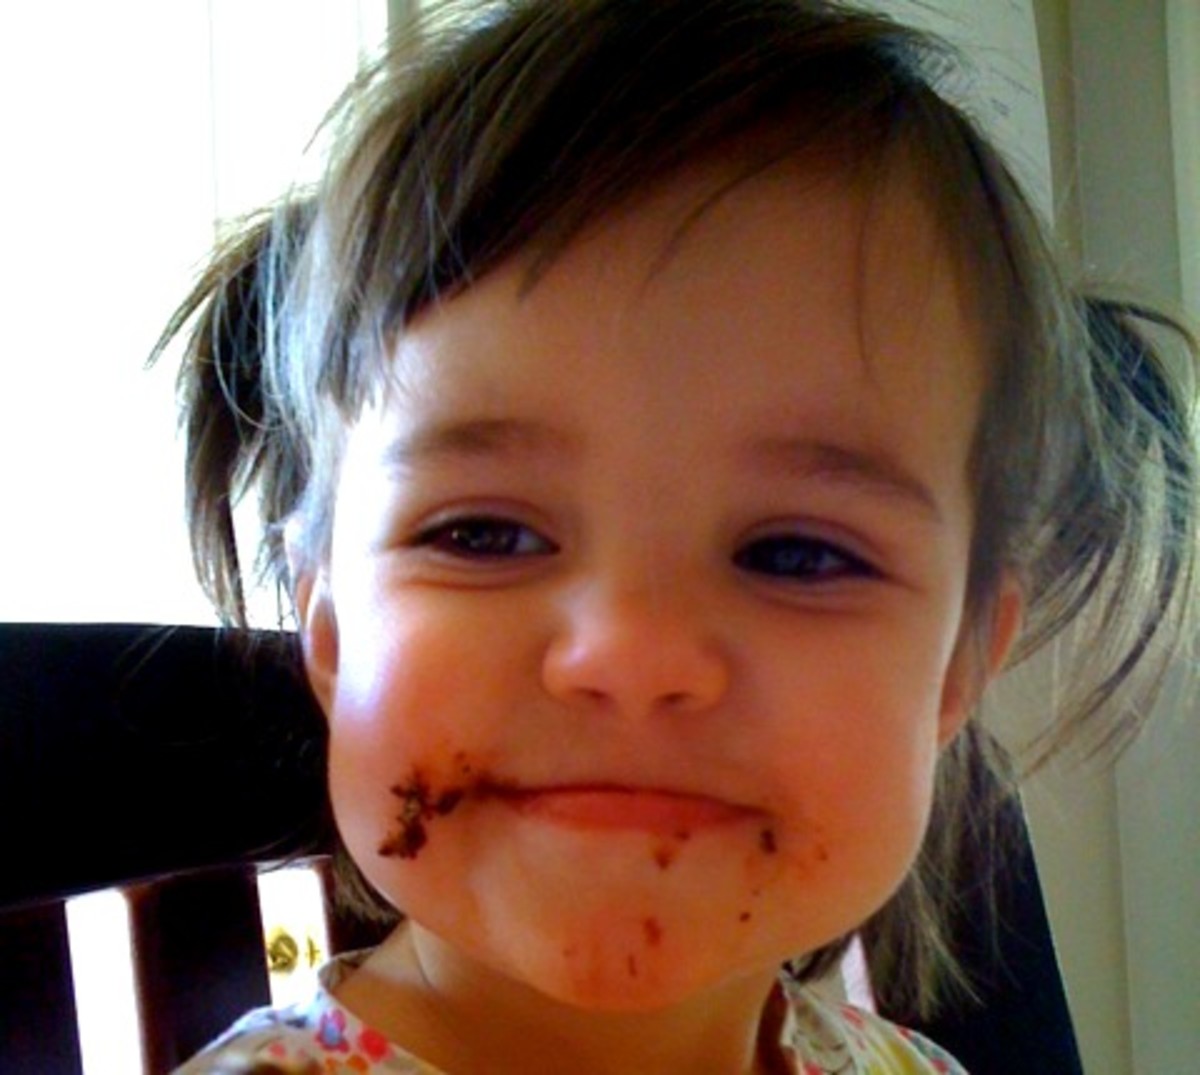 Baby's first cookie face. I posted this on Facebook back in the day, so my family could see that she DOES get treats.